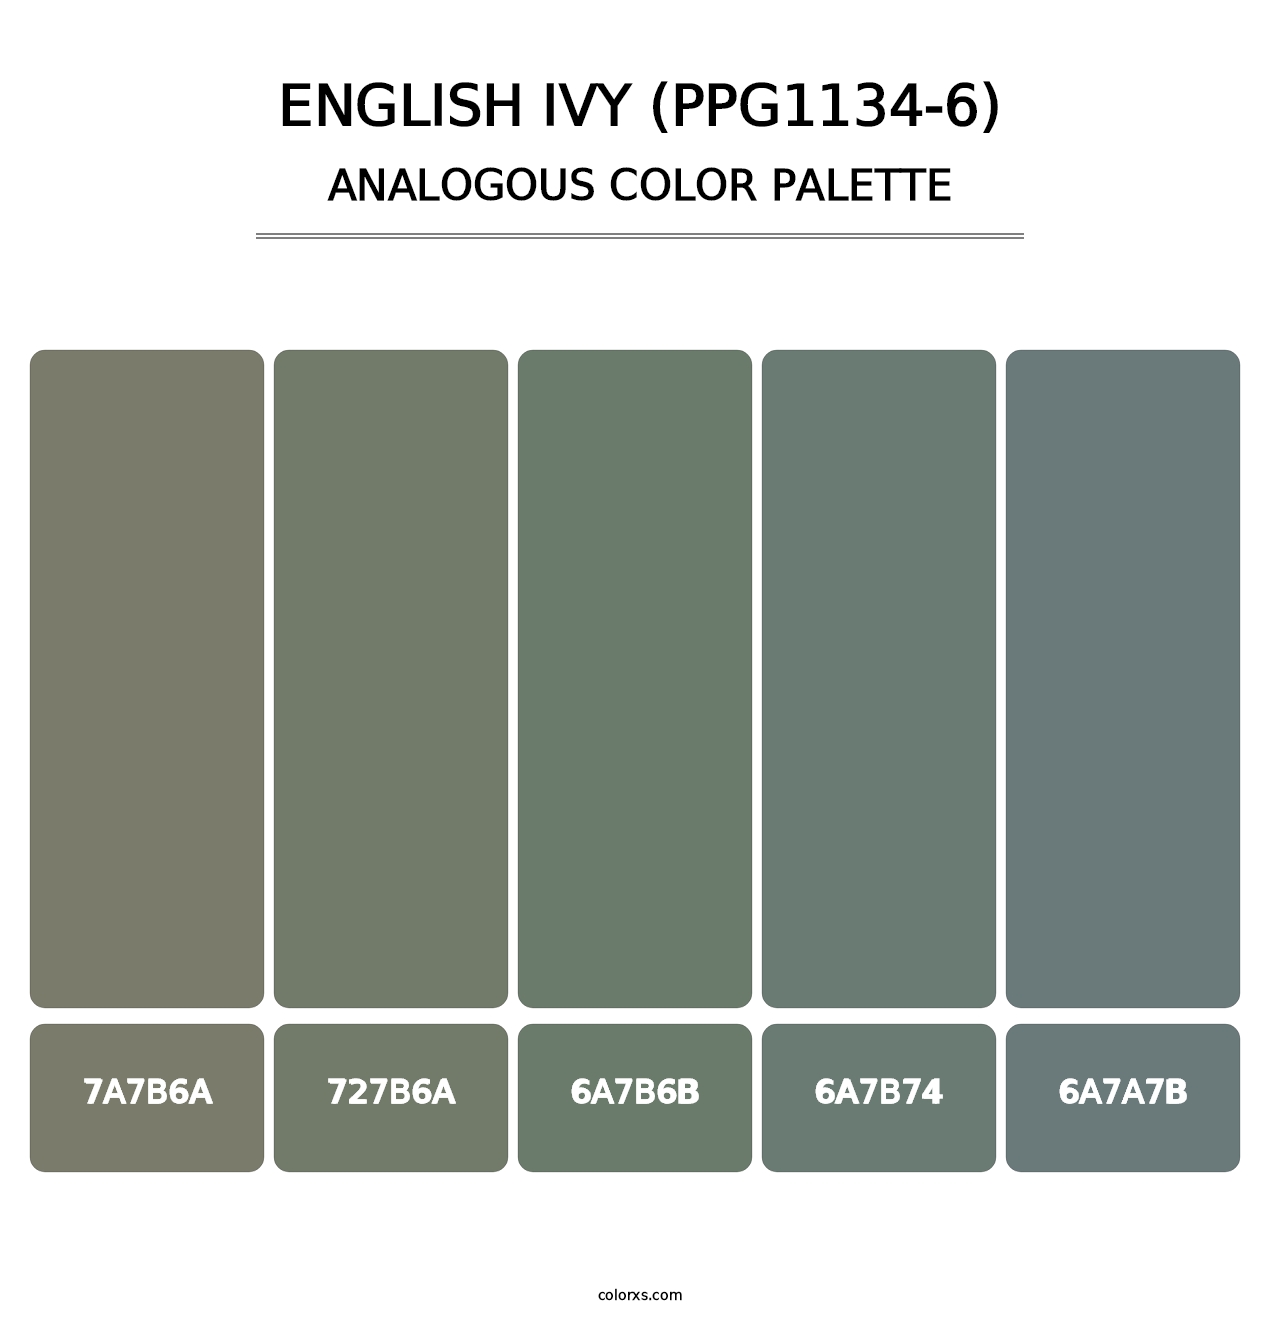 English Ivy (PPG1134-6) - Analogous Color Palette